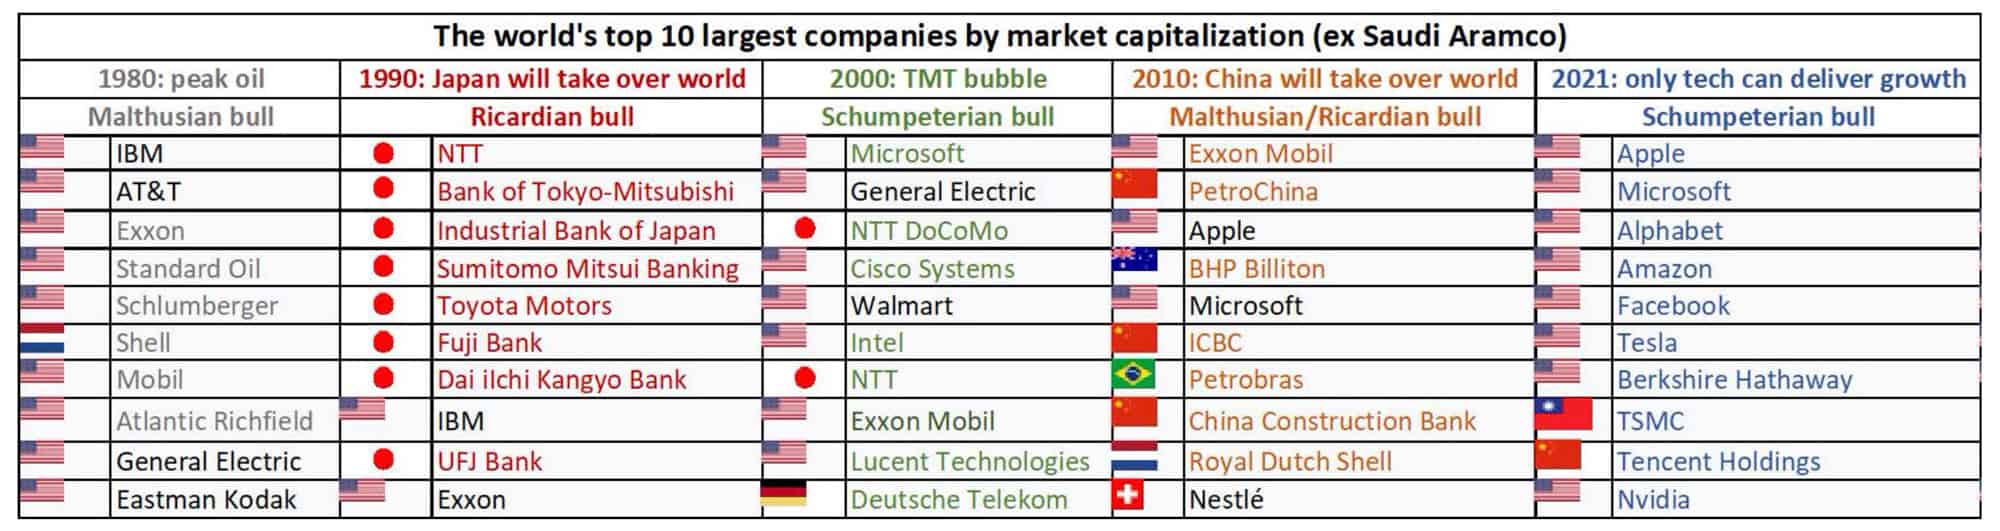 The world's top 10 largest companies